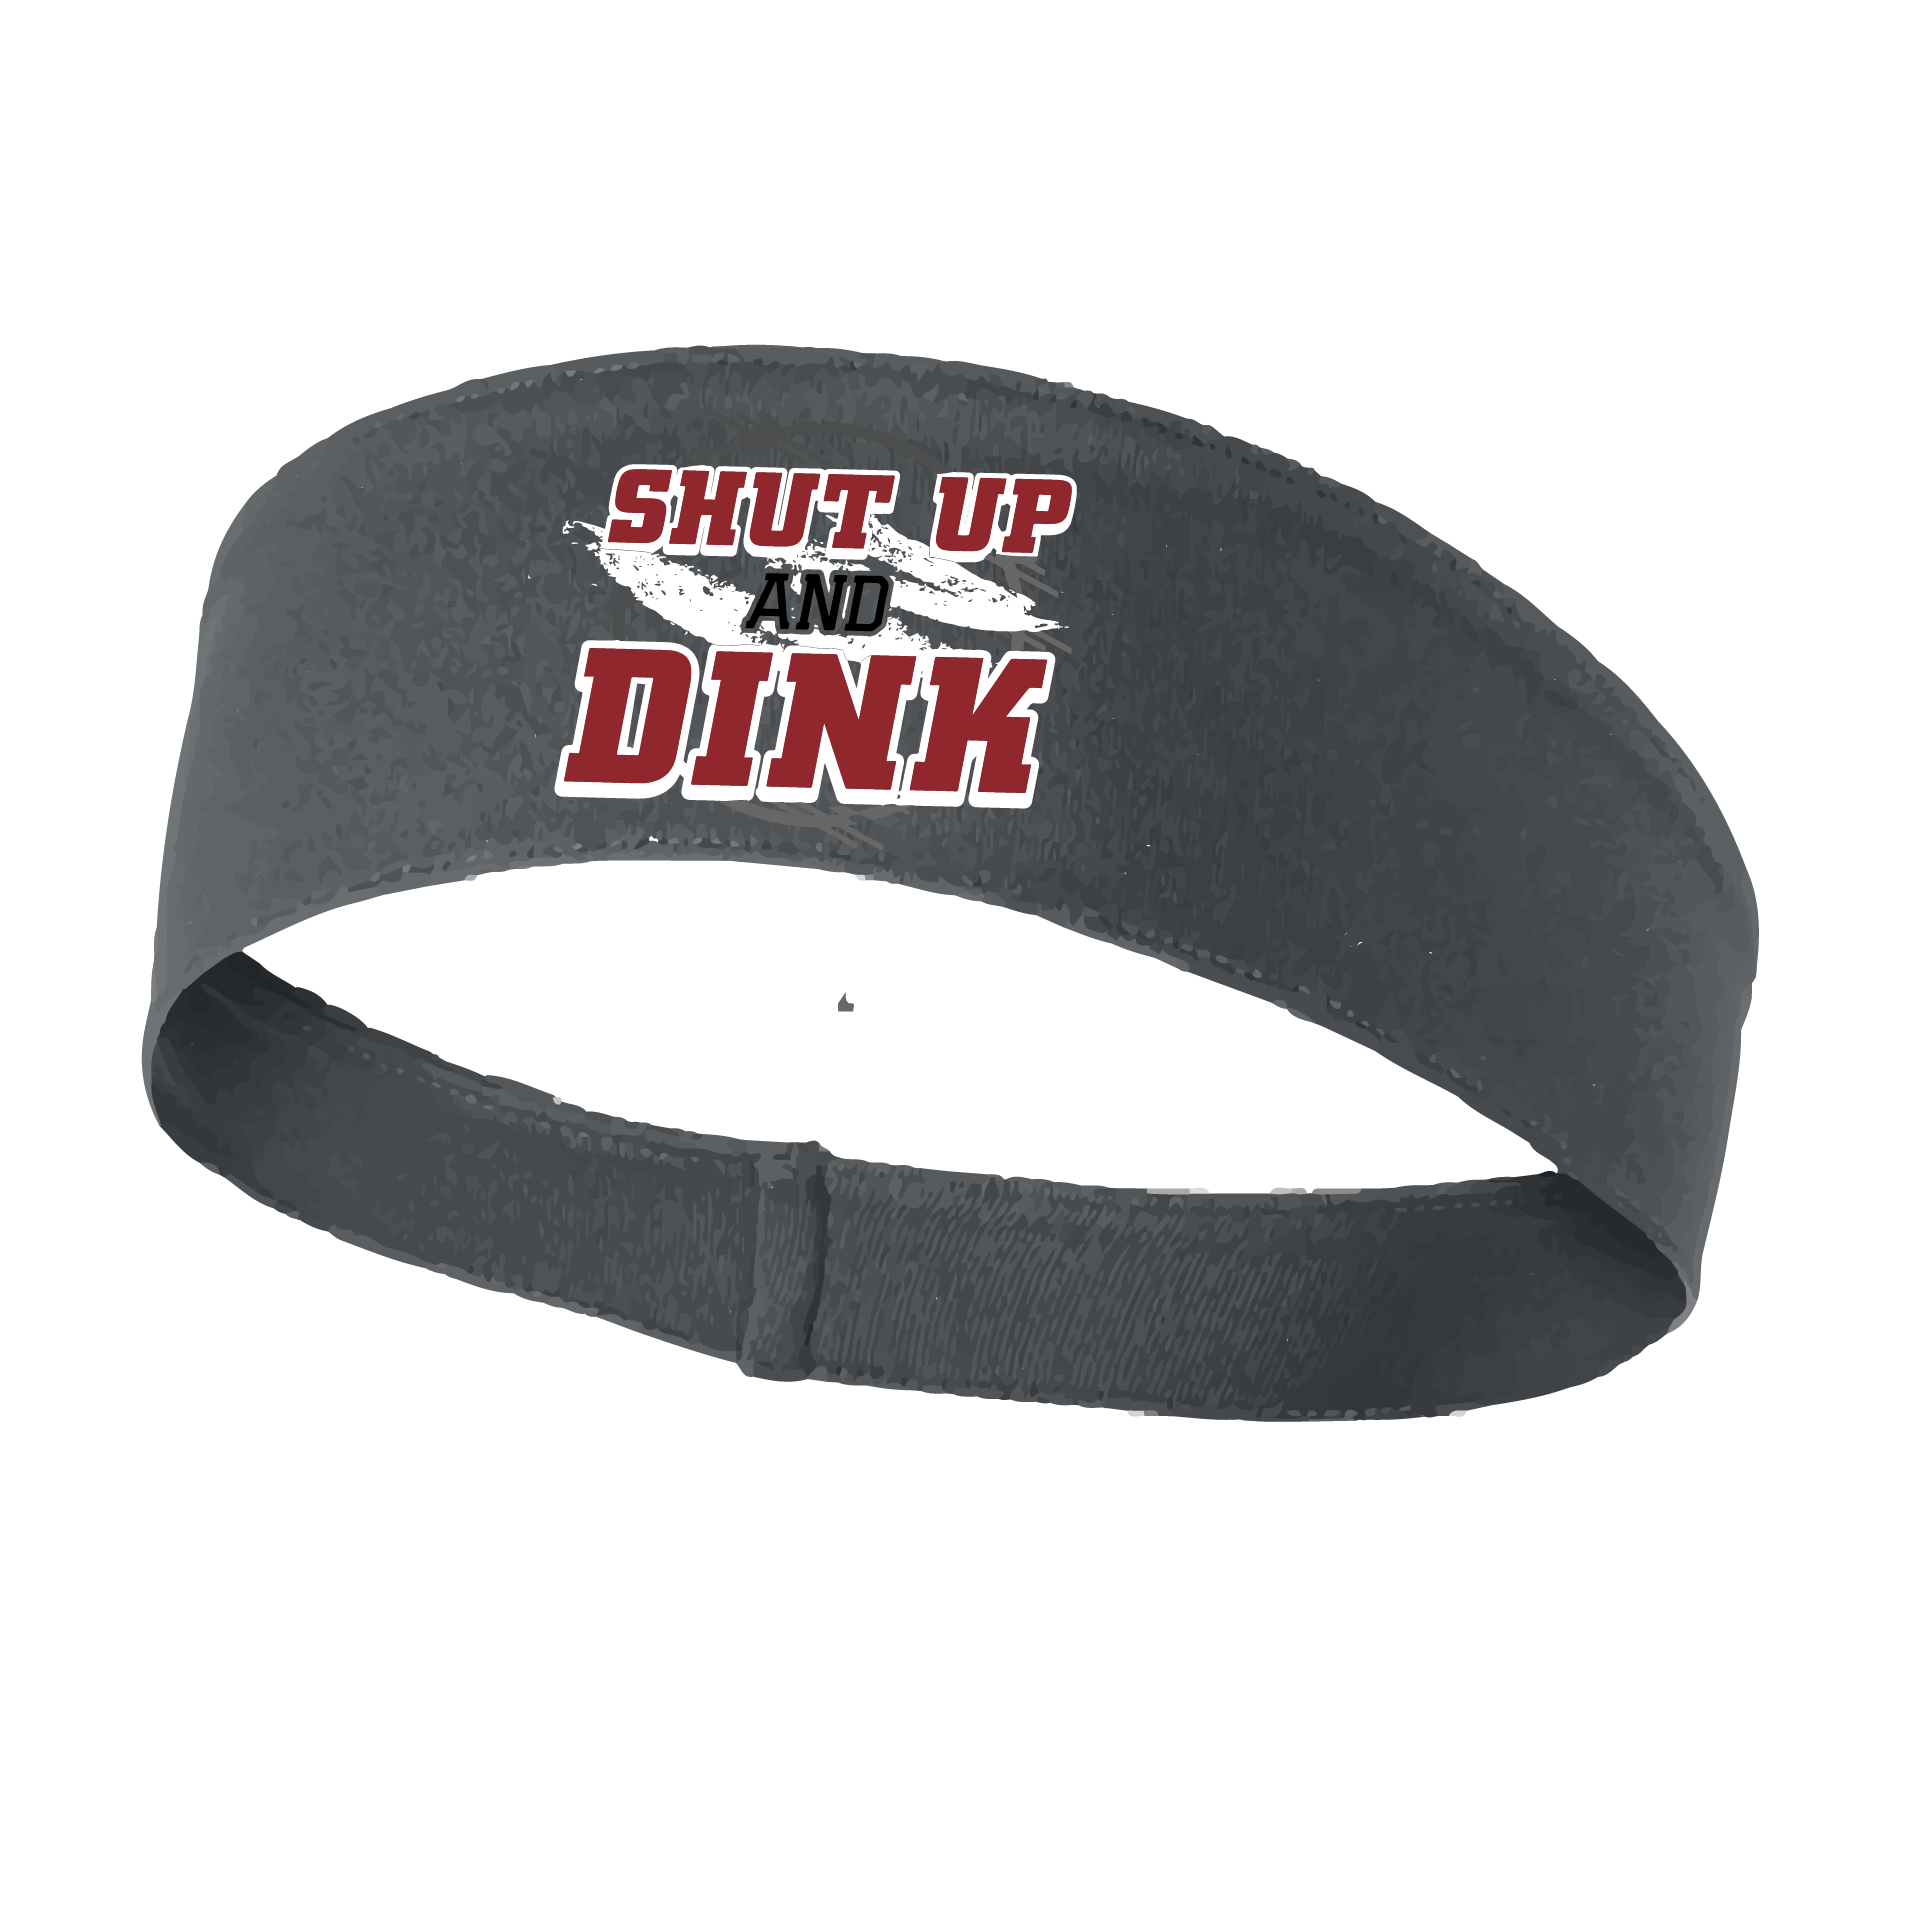 Pickleball Headband Design: Shut Up and Dink  This fun, pickleball designed, moisture-wicking headband narrows in the back to fit more securely. Single-needle top-stitched edging. These headbands come in a variety of colors. Truly shows your love for the sport of pickleball!!